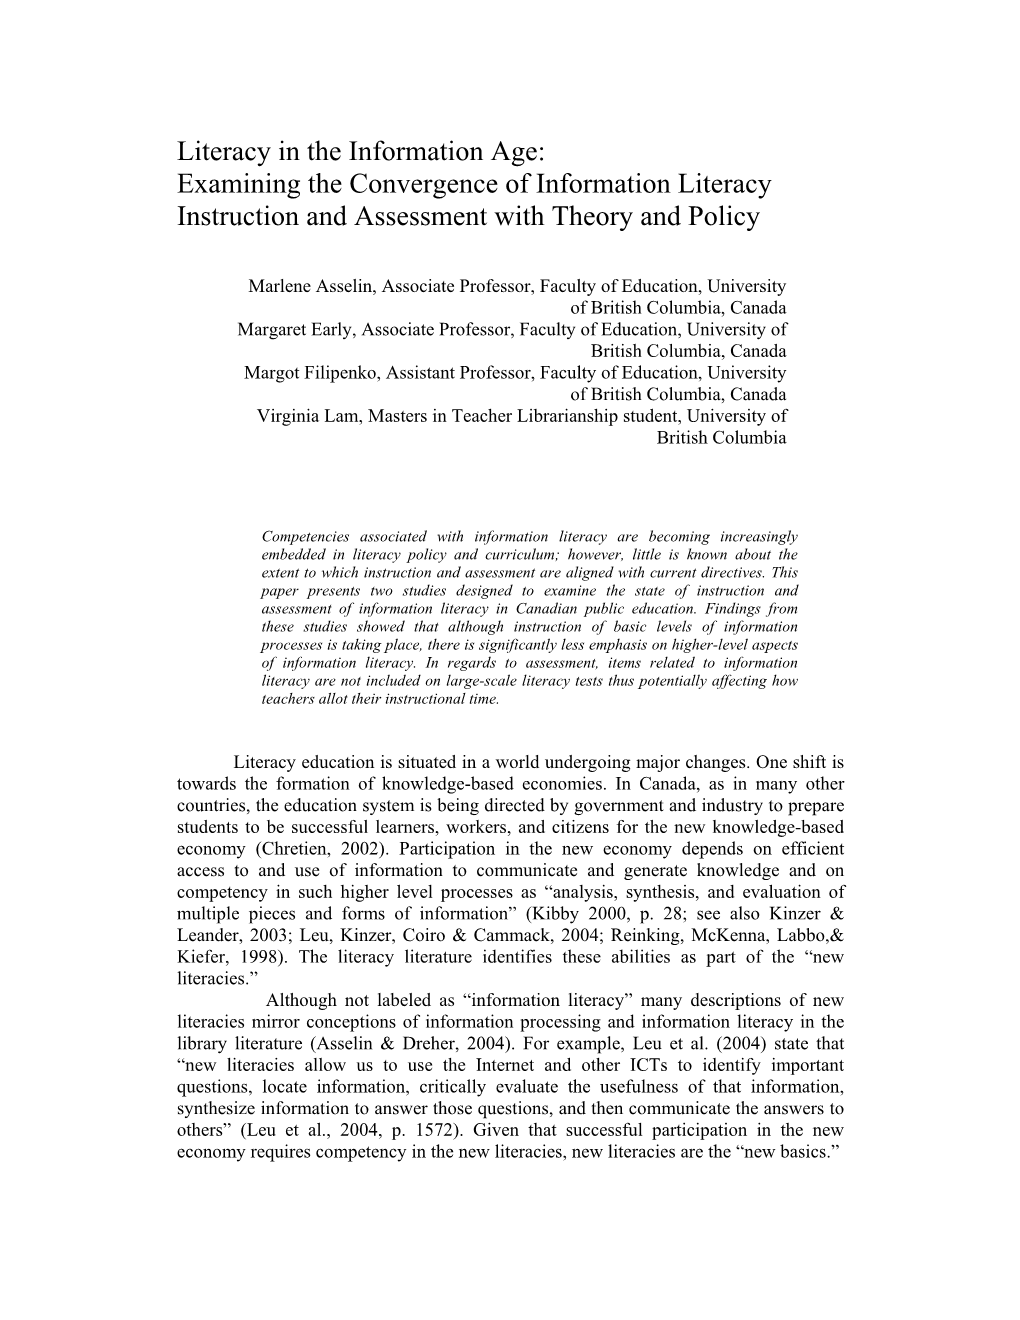 Examining the Convergence of Information Literacy Instruction and Assessment with Theory and Policy